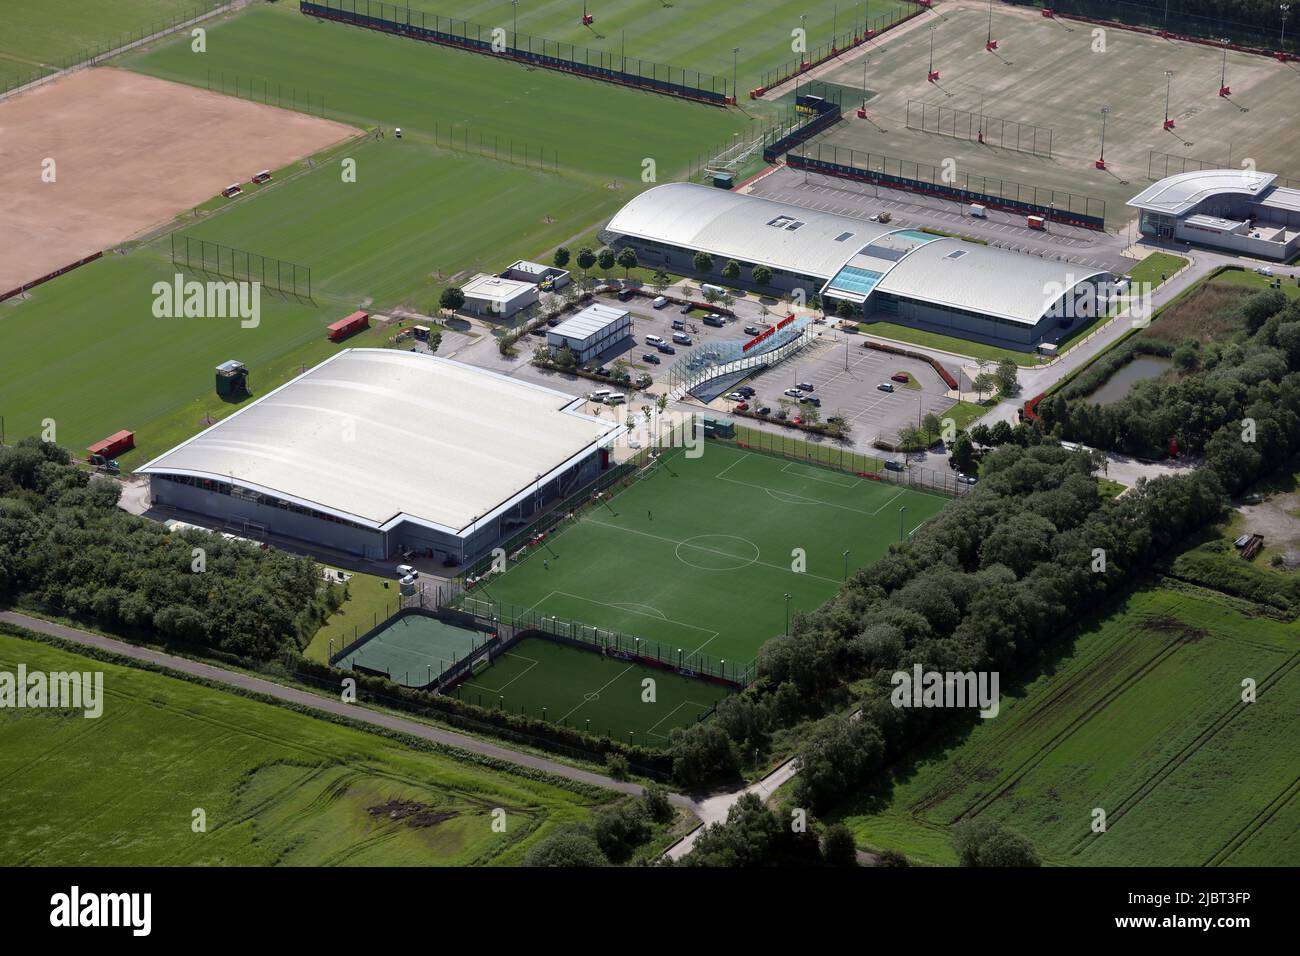 aerial view of the Aon Training Complex, Manchester United's Carrington training ground, west of Manchester Stock Photo